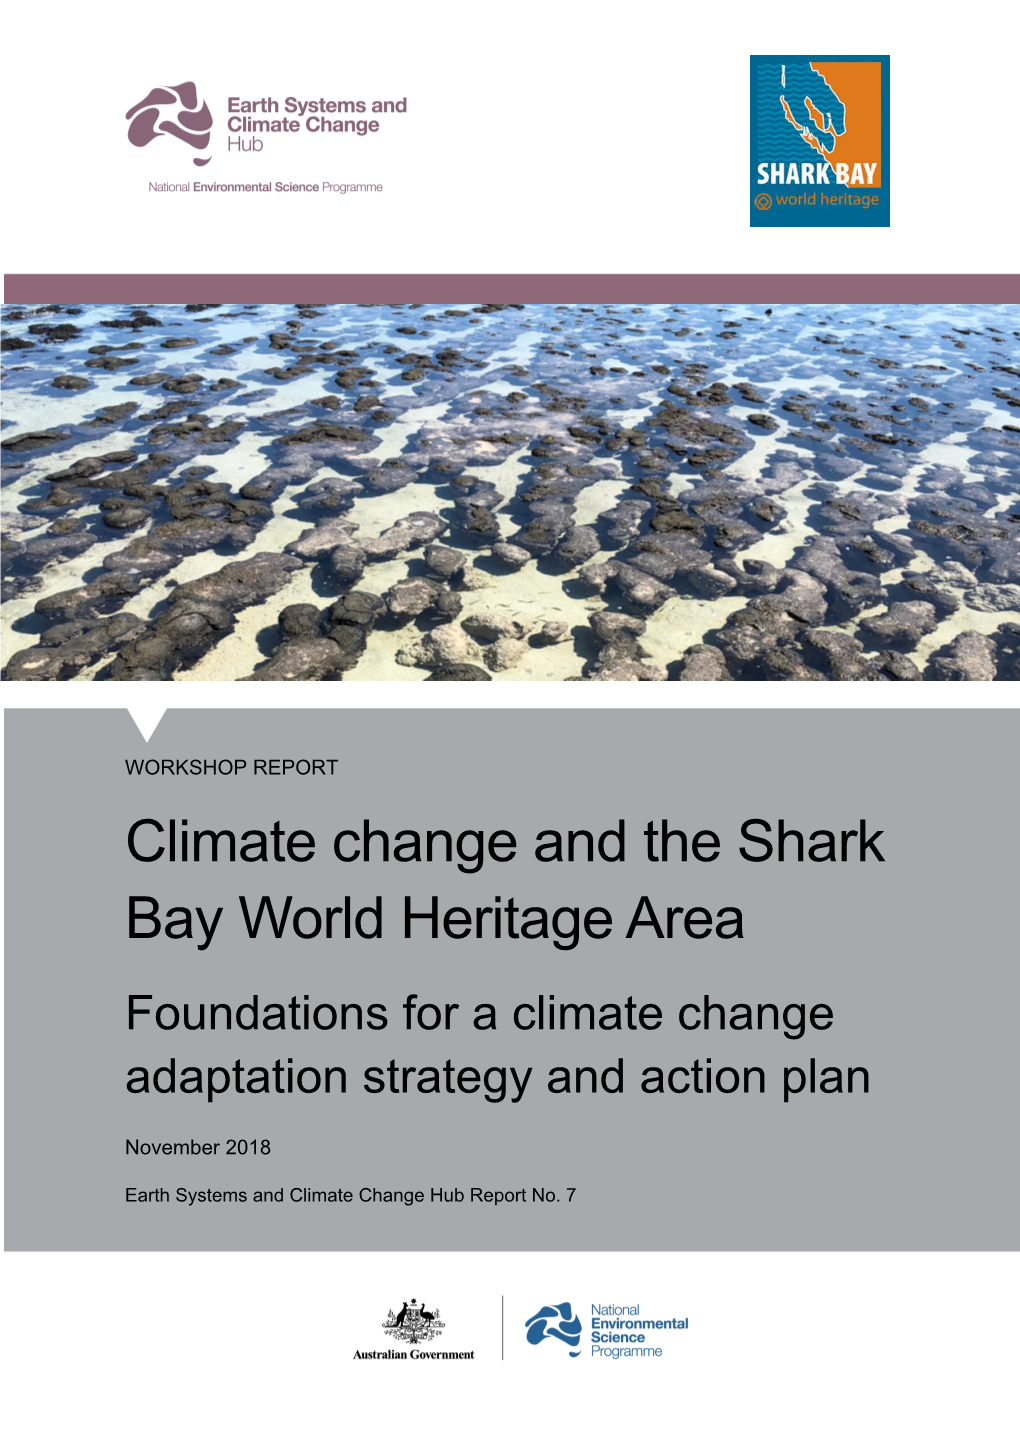 Climate Change and the Shark Bay World Heritage Area Foundations for a Climate Change Adaptation Strategy and Action Plan